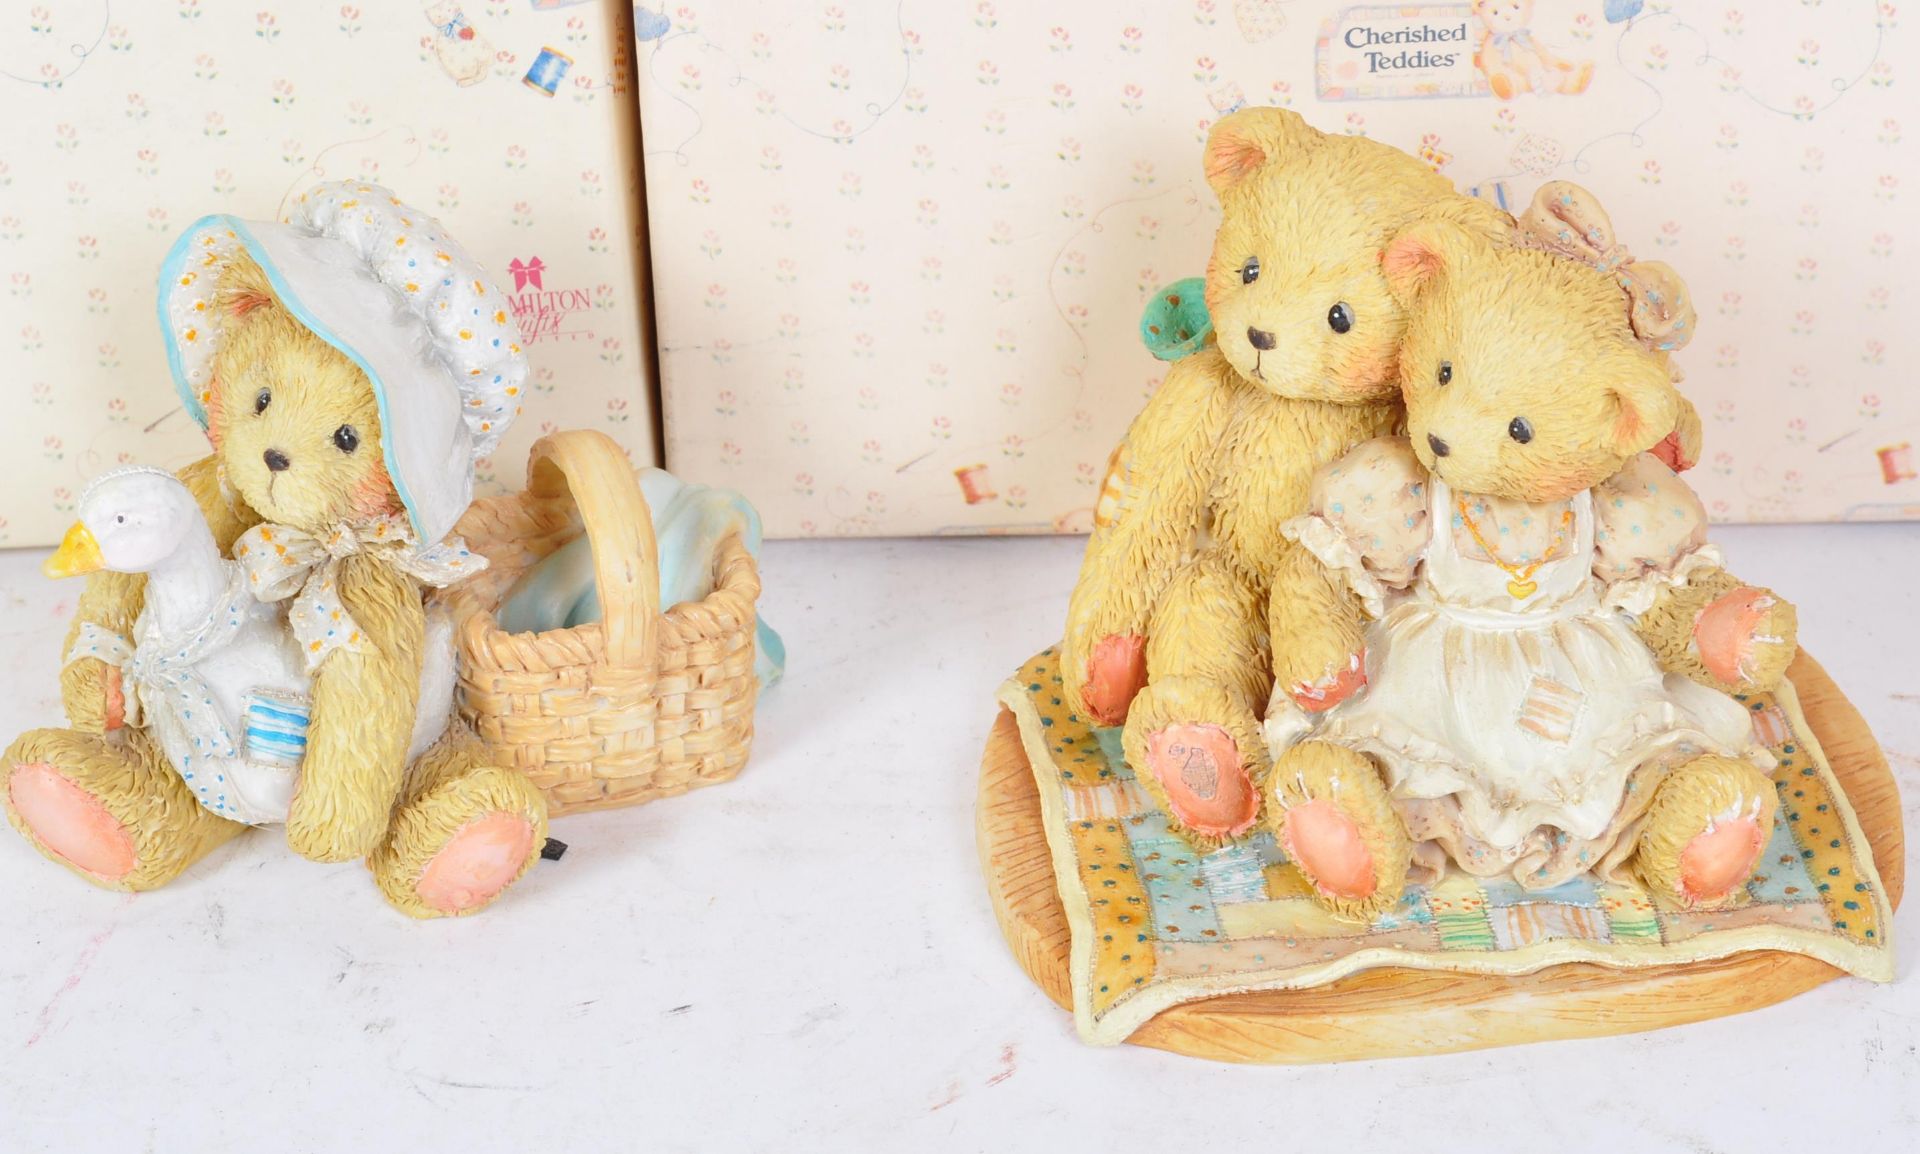 COLLECTION OF VINTAGE CHERISHED TEDDIES FIGURES - Image 5 of 5